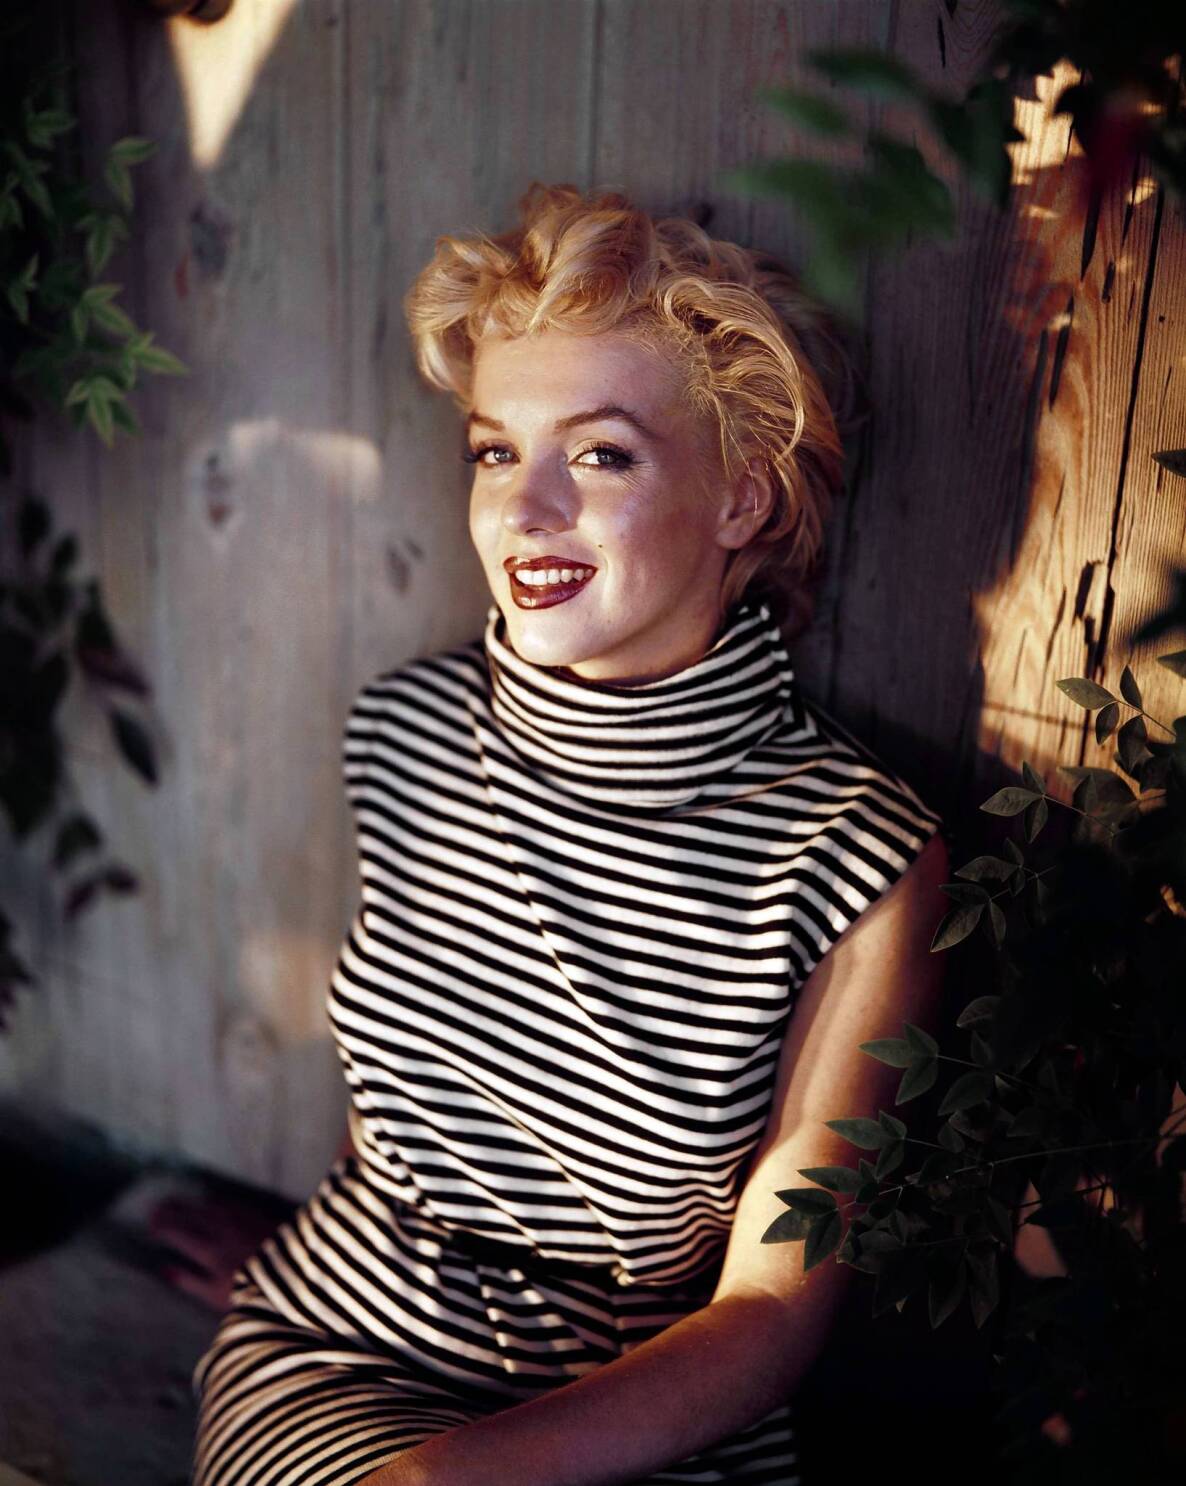 Marilyn Monroe is being exploited even more in death than she was in life